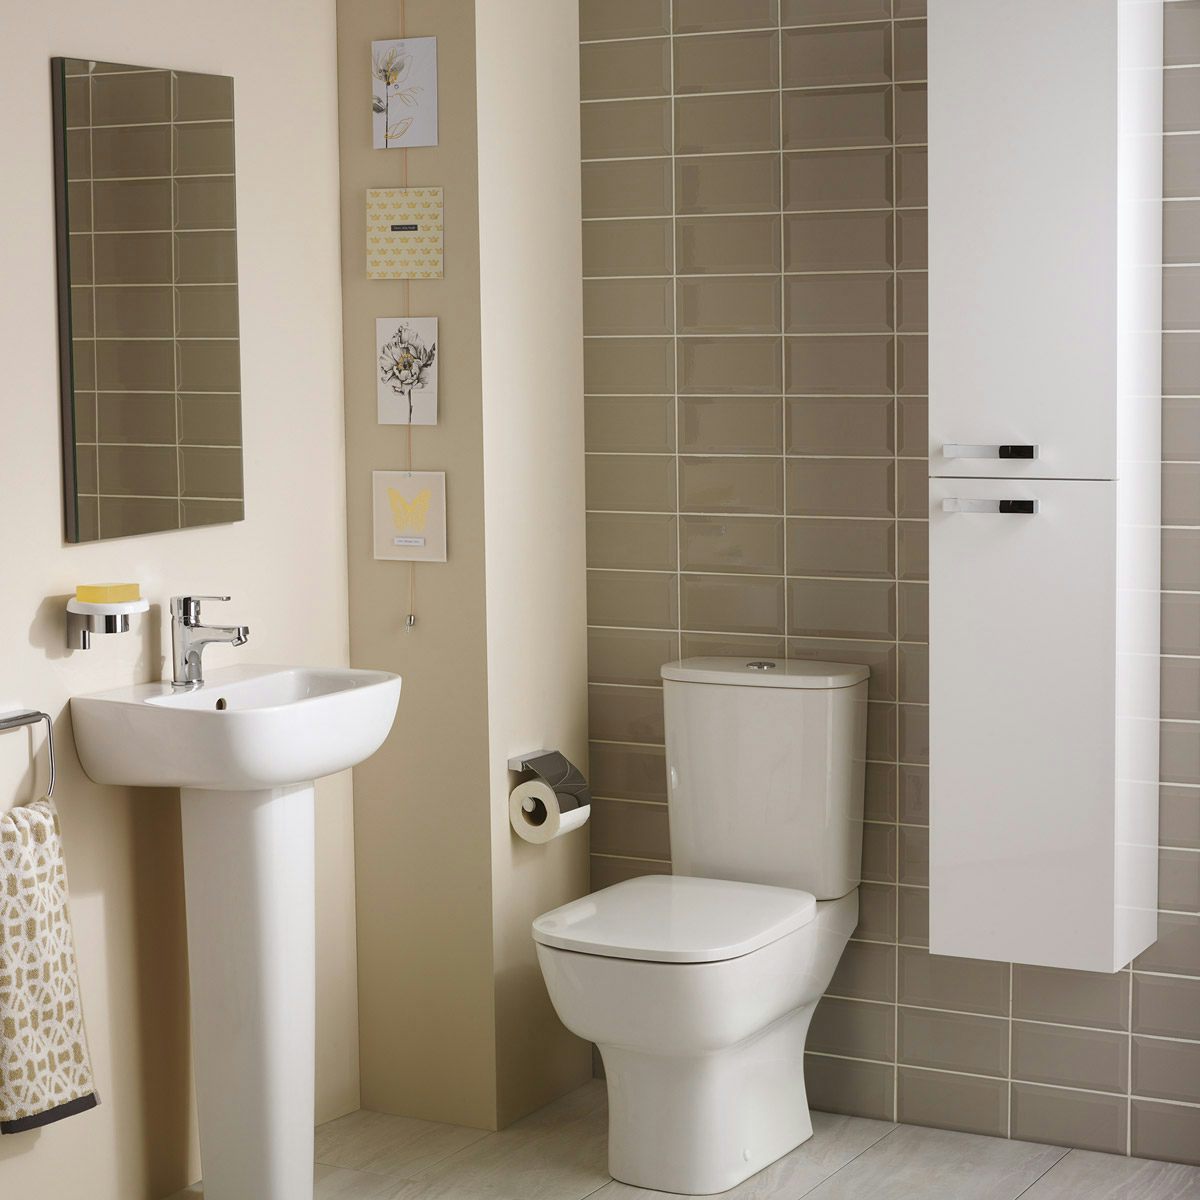 Ideal Standard Studio Echo cloakroom suite with open close coupled toilet and full pedestal basin 450mm